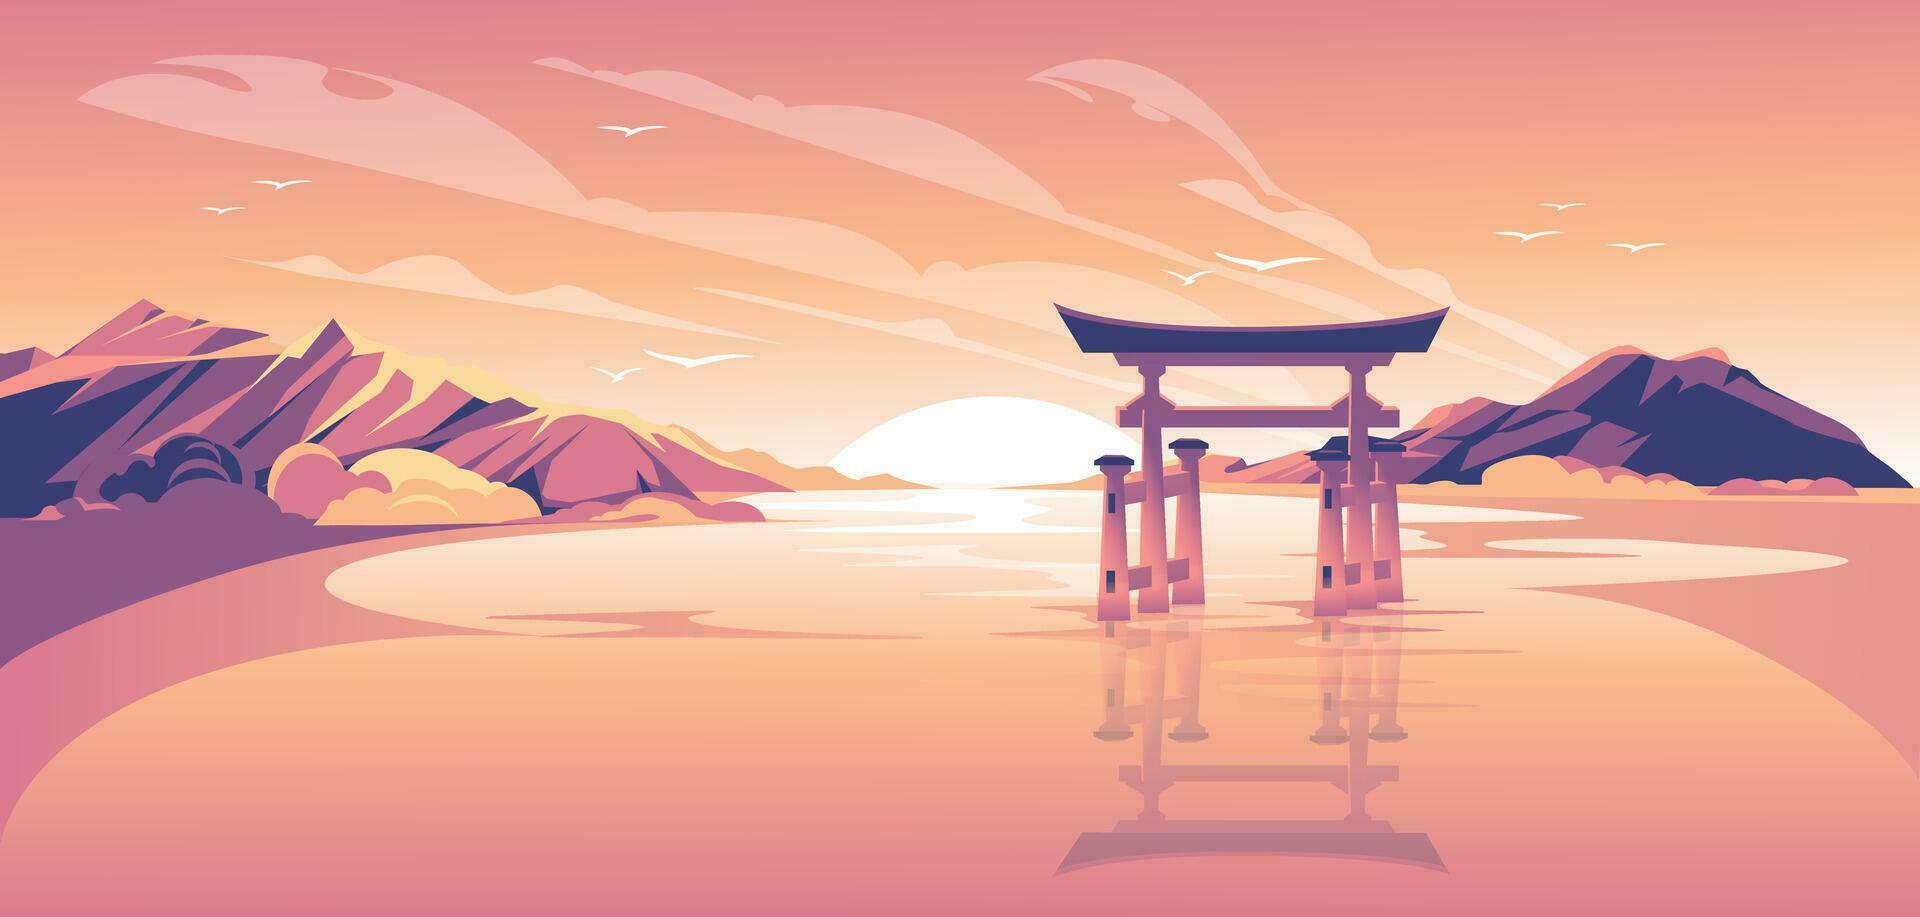 sunset landscape with japanese torii in water and mountains. Pink, orange and purple gradient. Vector illustration